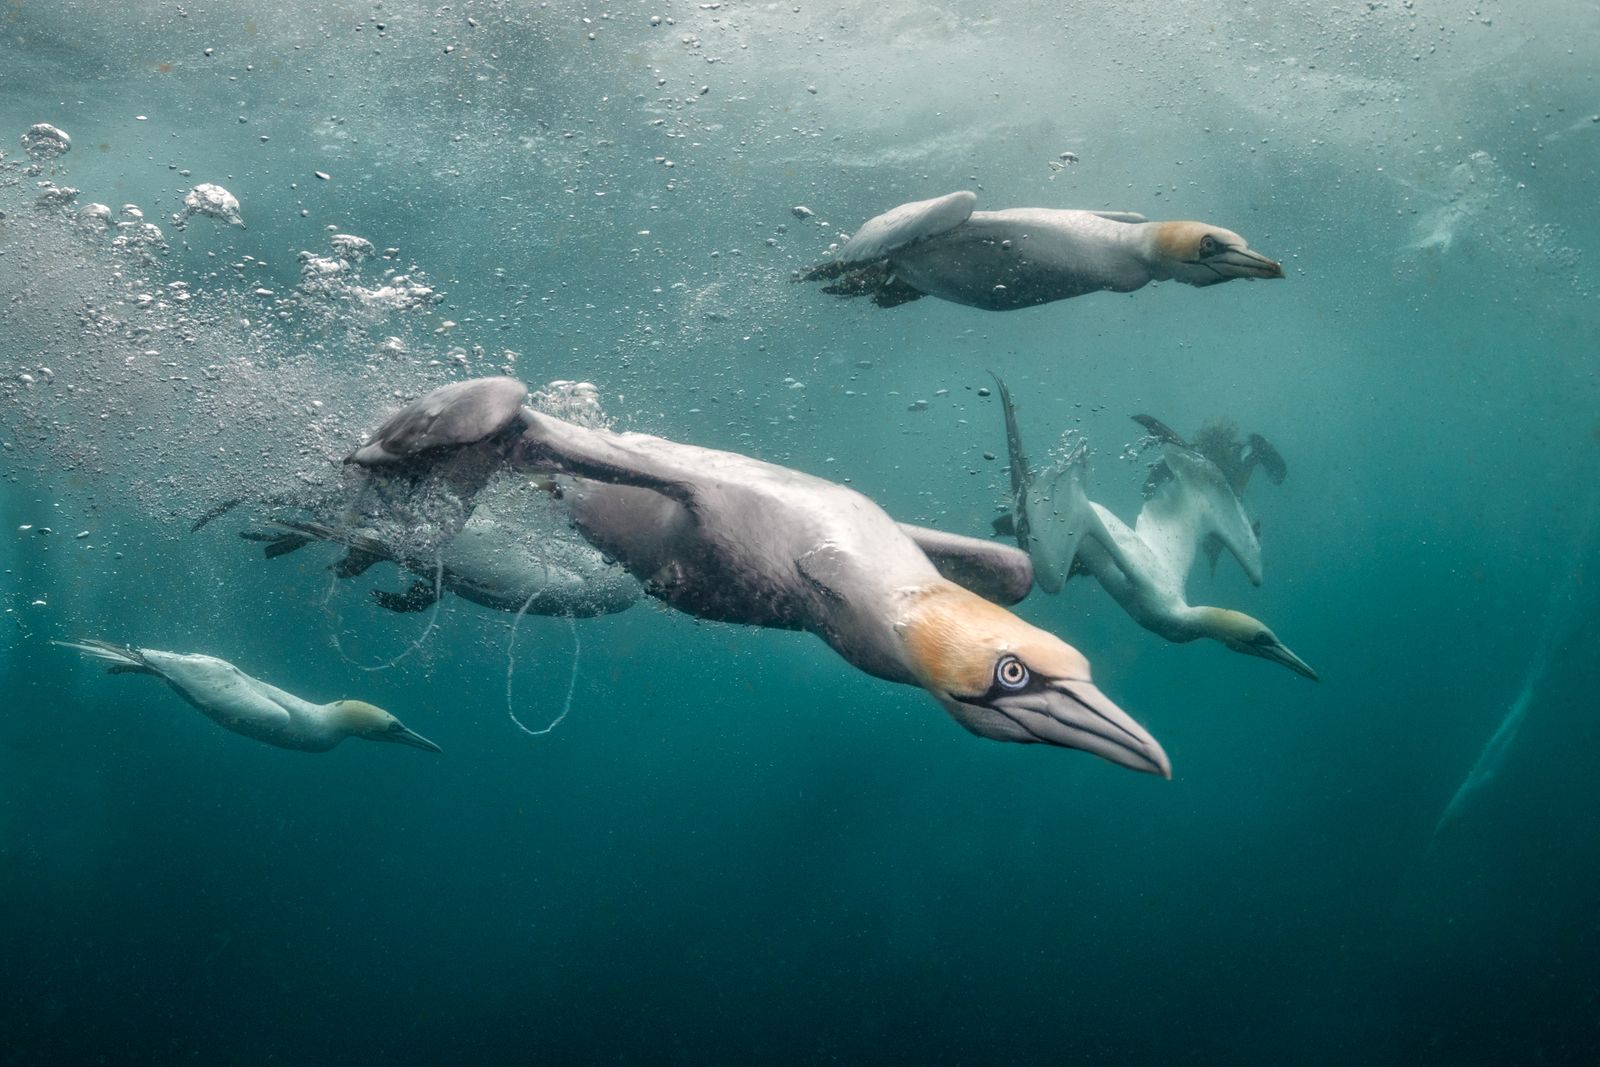 See 15 Otherworldly Images From the Underwater Photographer of the Year Awards